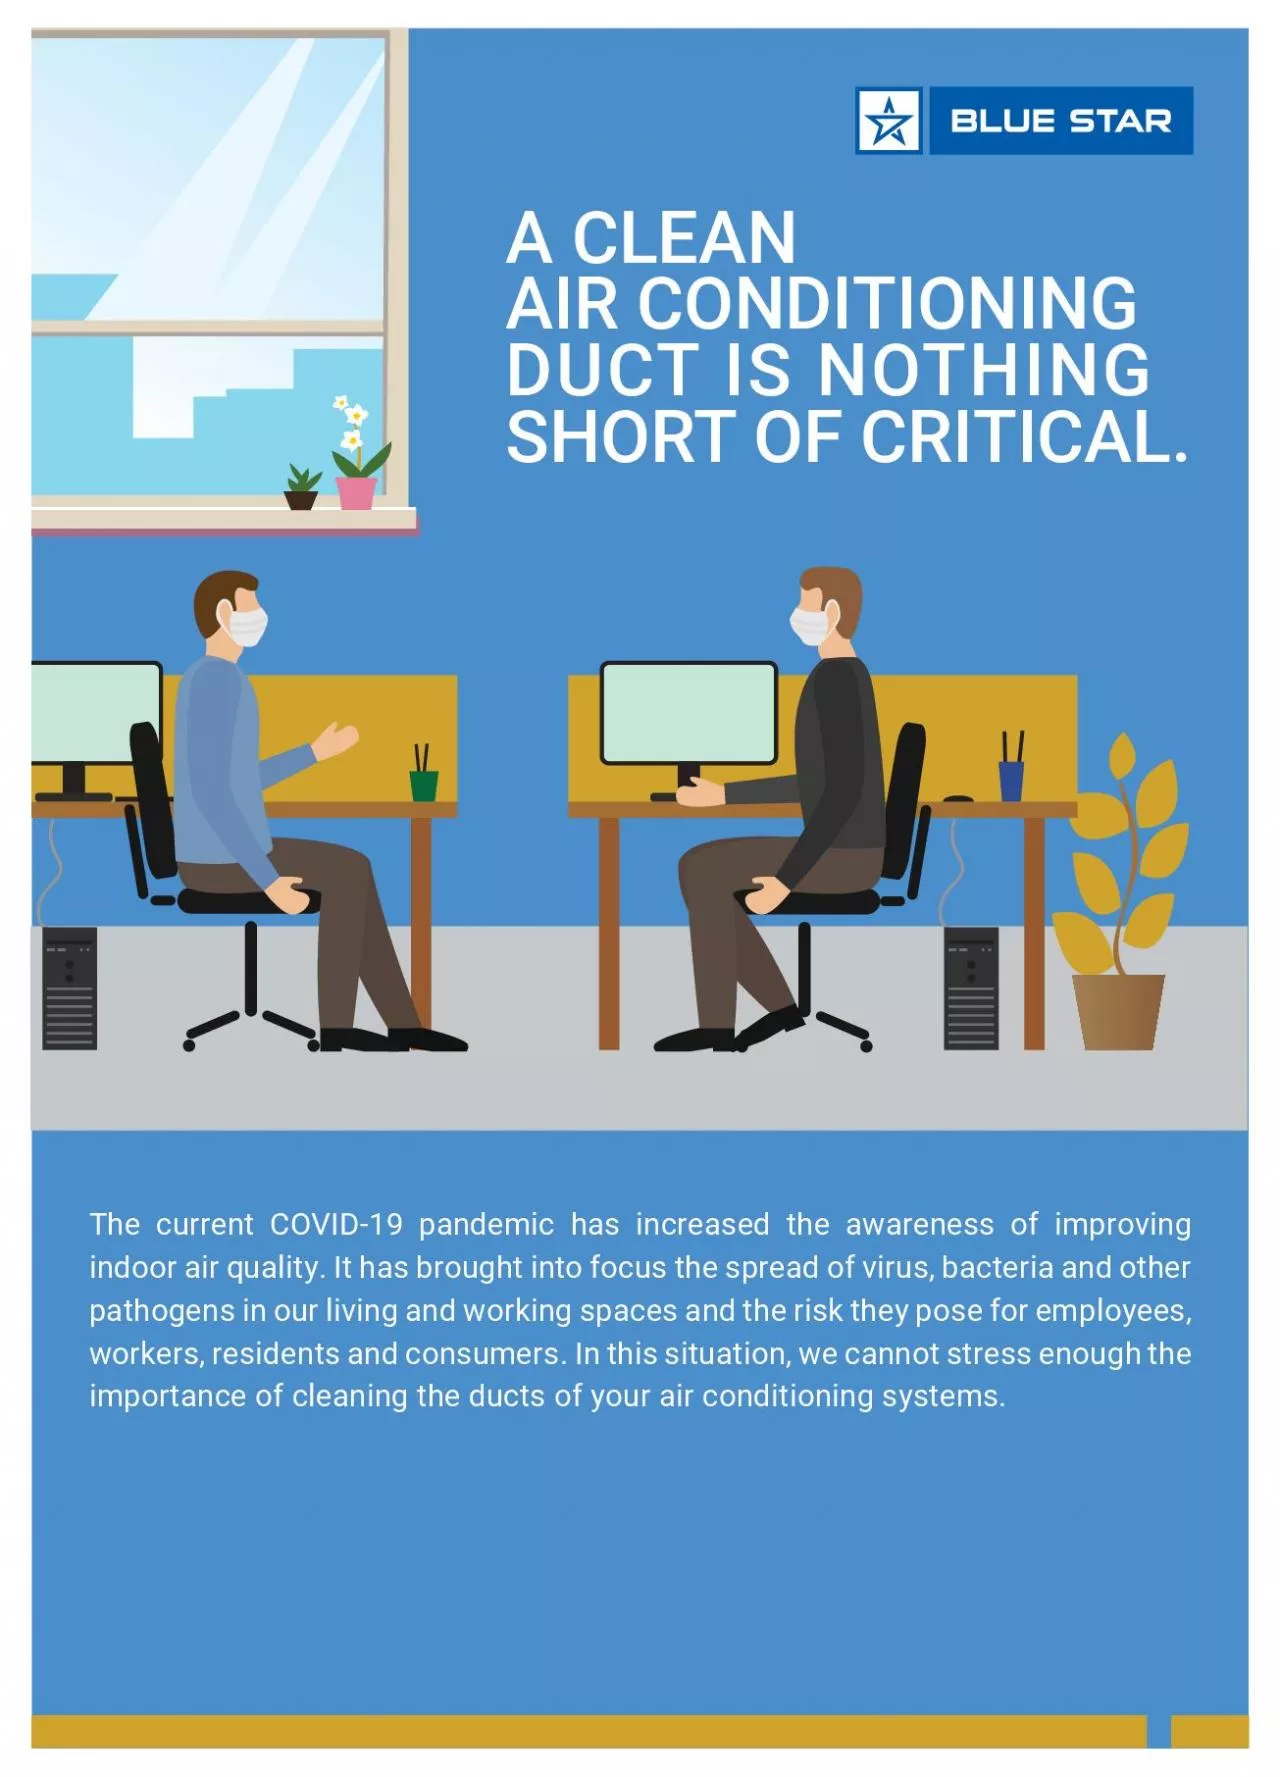 A CLEANAIR CONDITIONING DUCT IS NOTHING SHORT OF CRITICAL